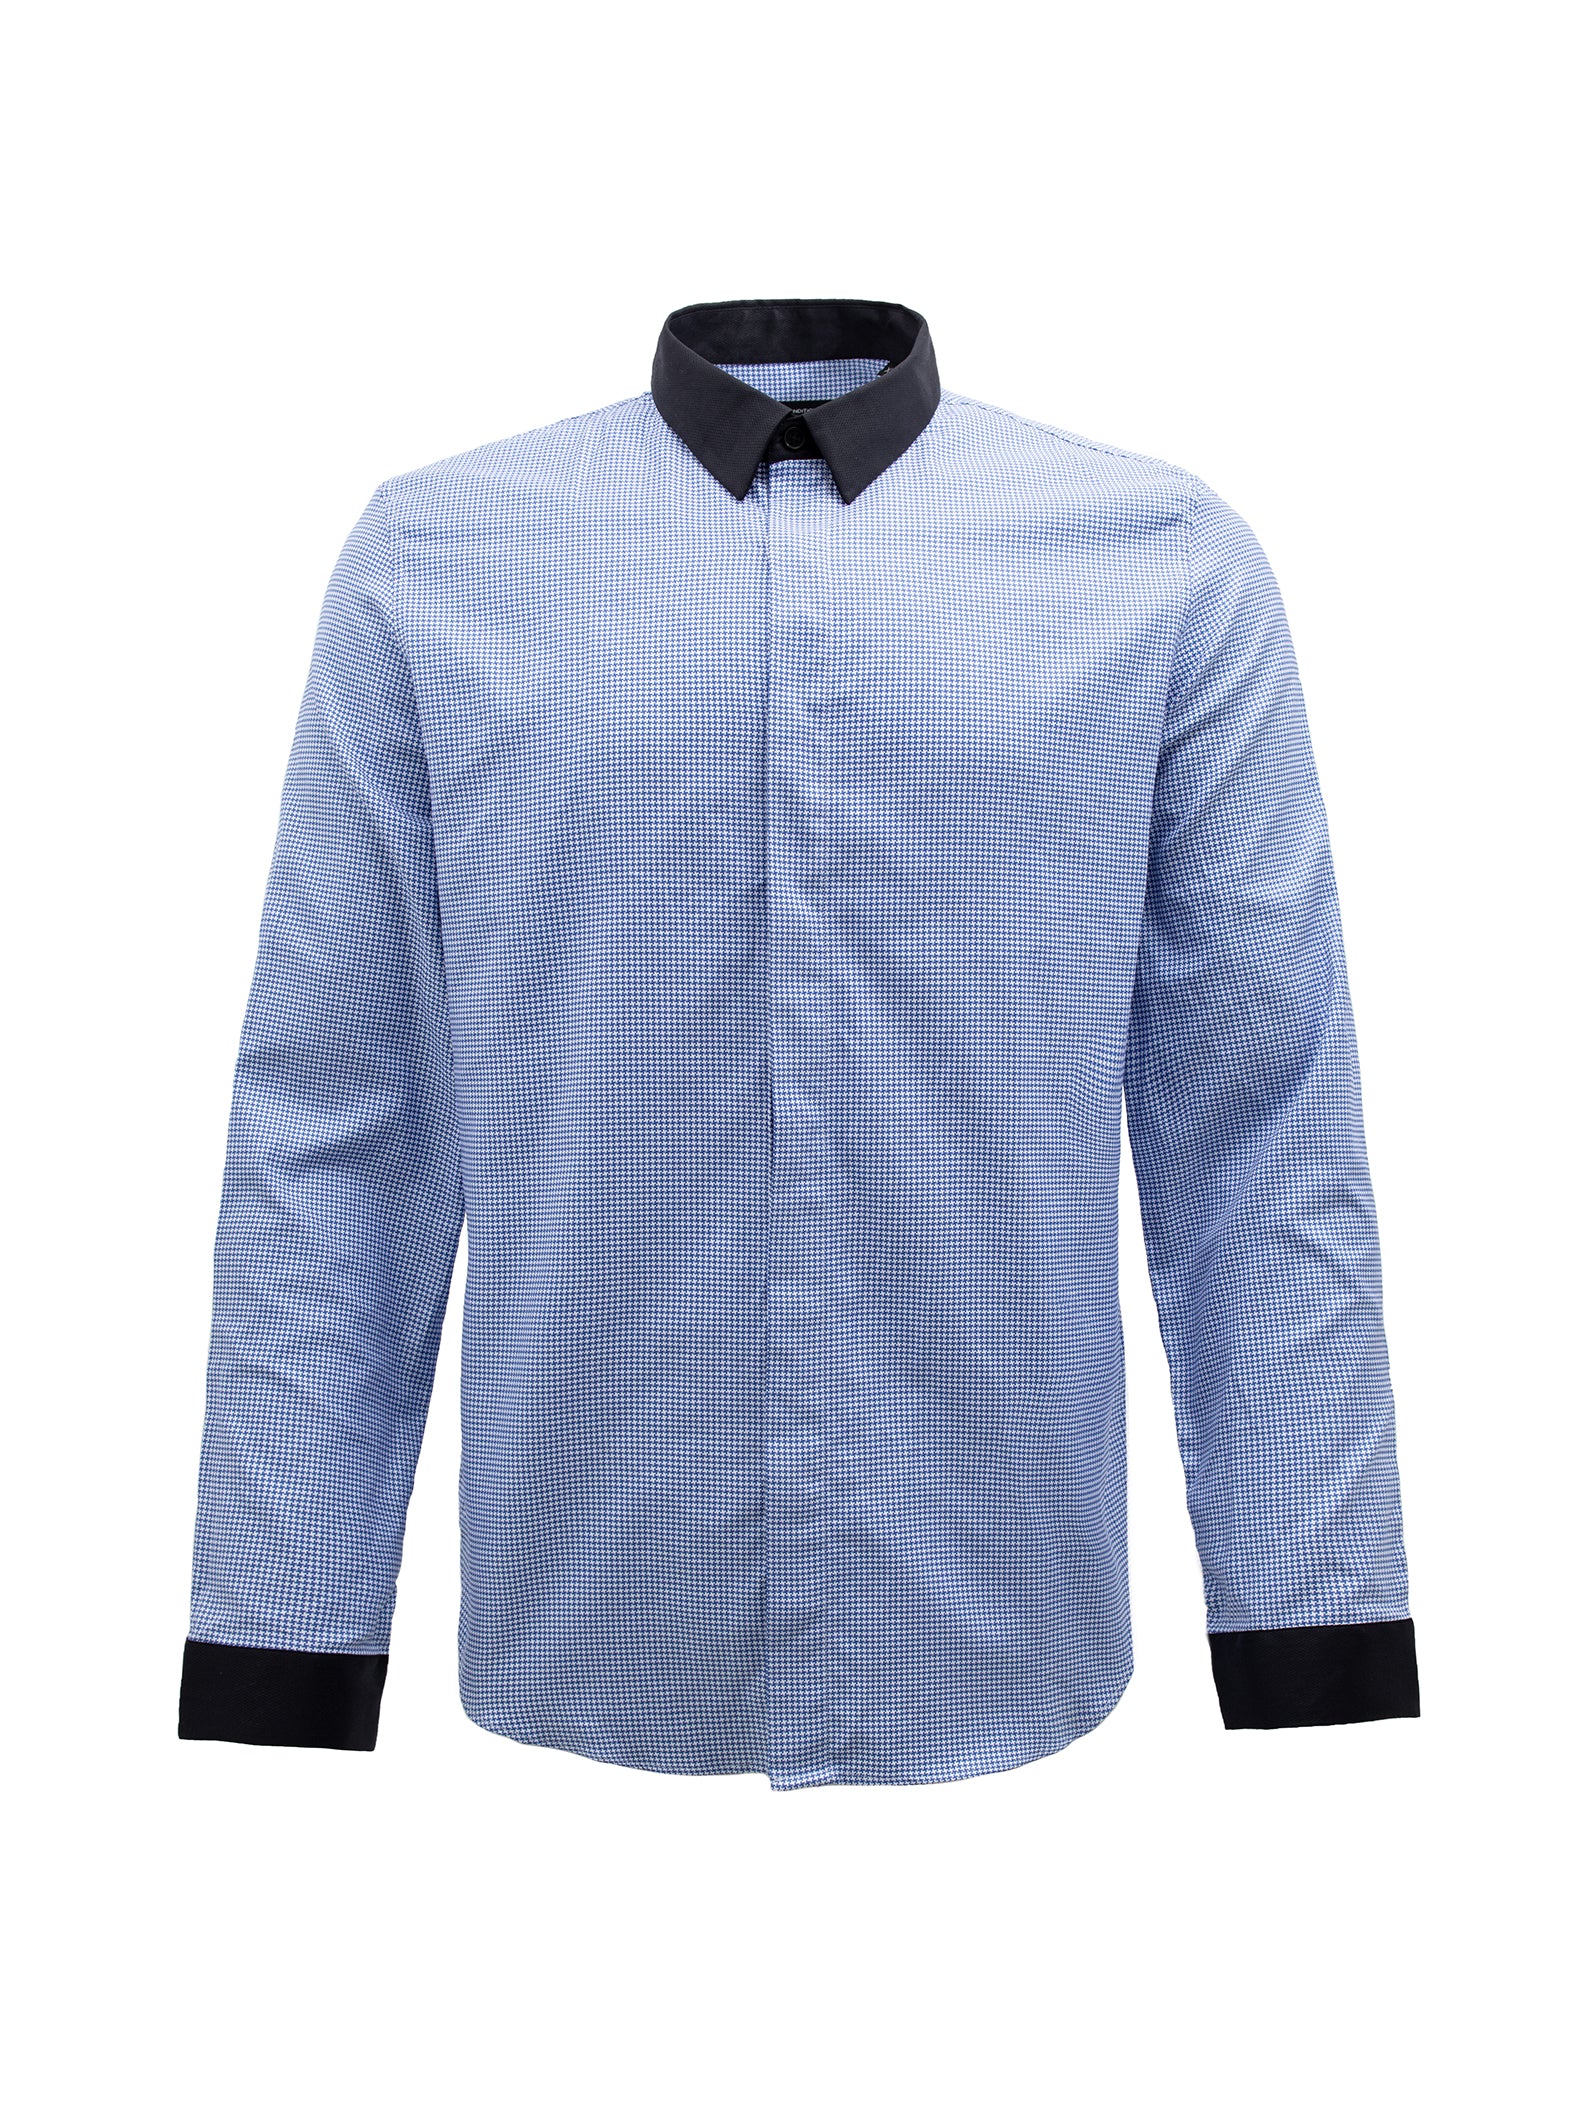 BLUE AND BLACK COLLARED SHIRT